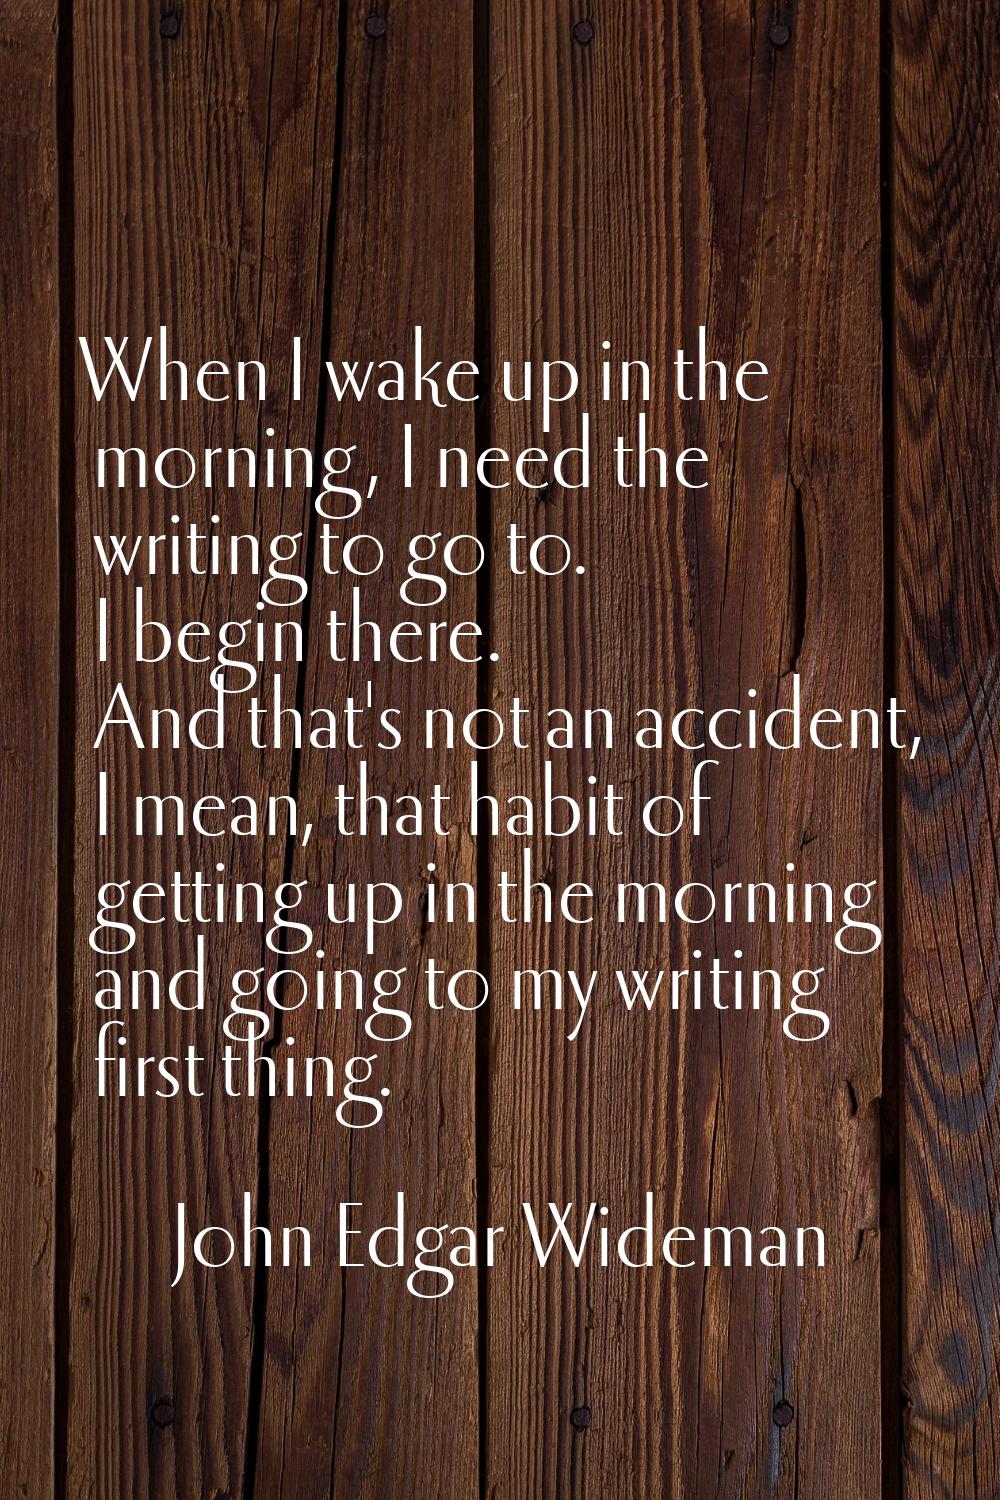 When I wake up in the morning, I need the writing to go to. I begin there. And that's not an accide